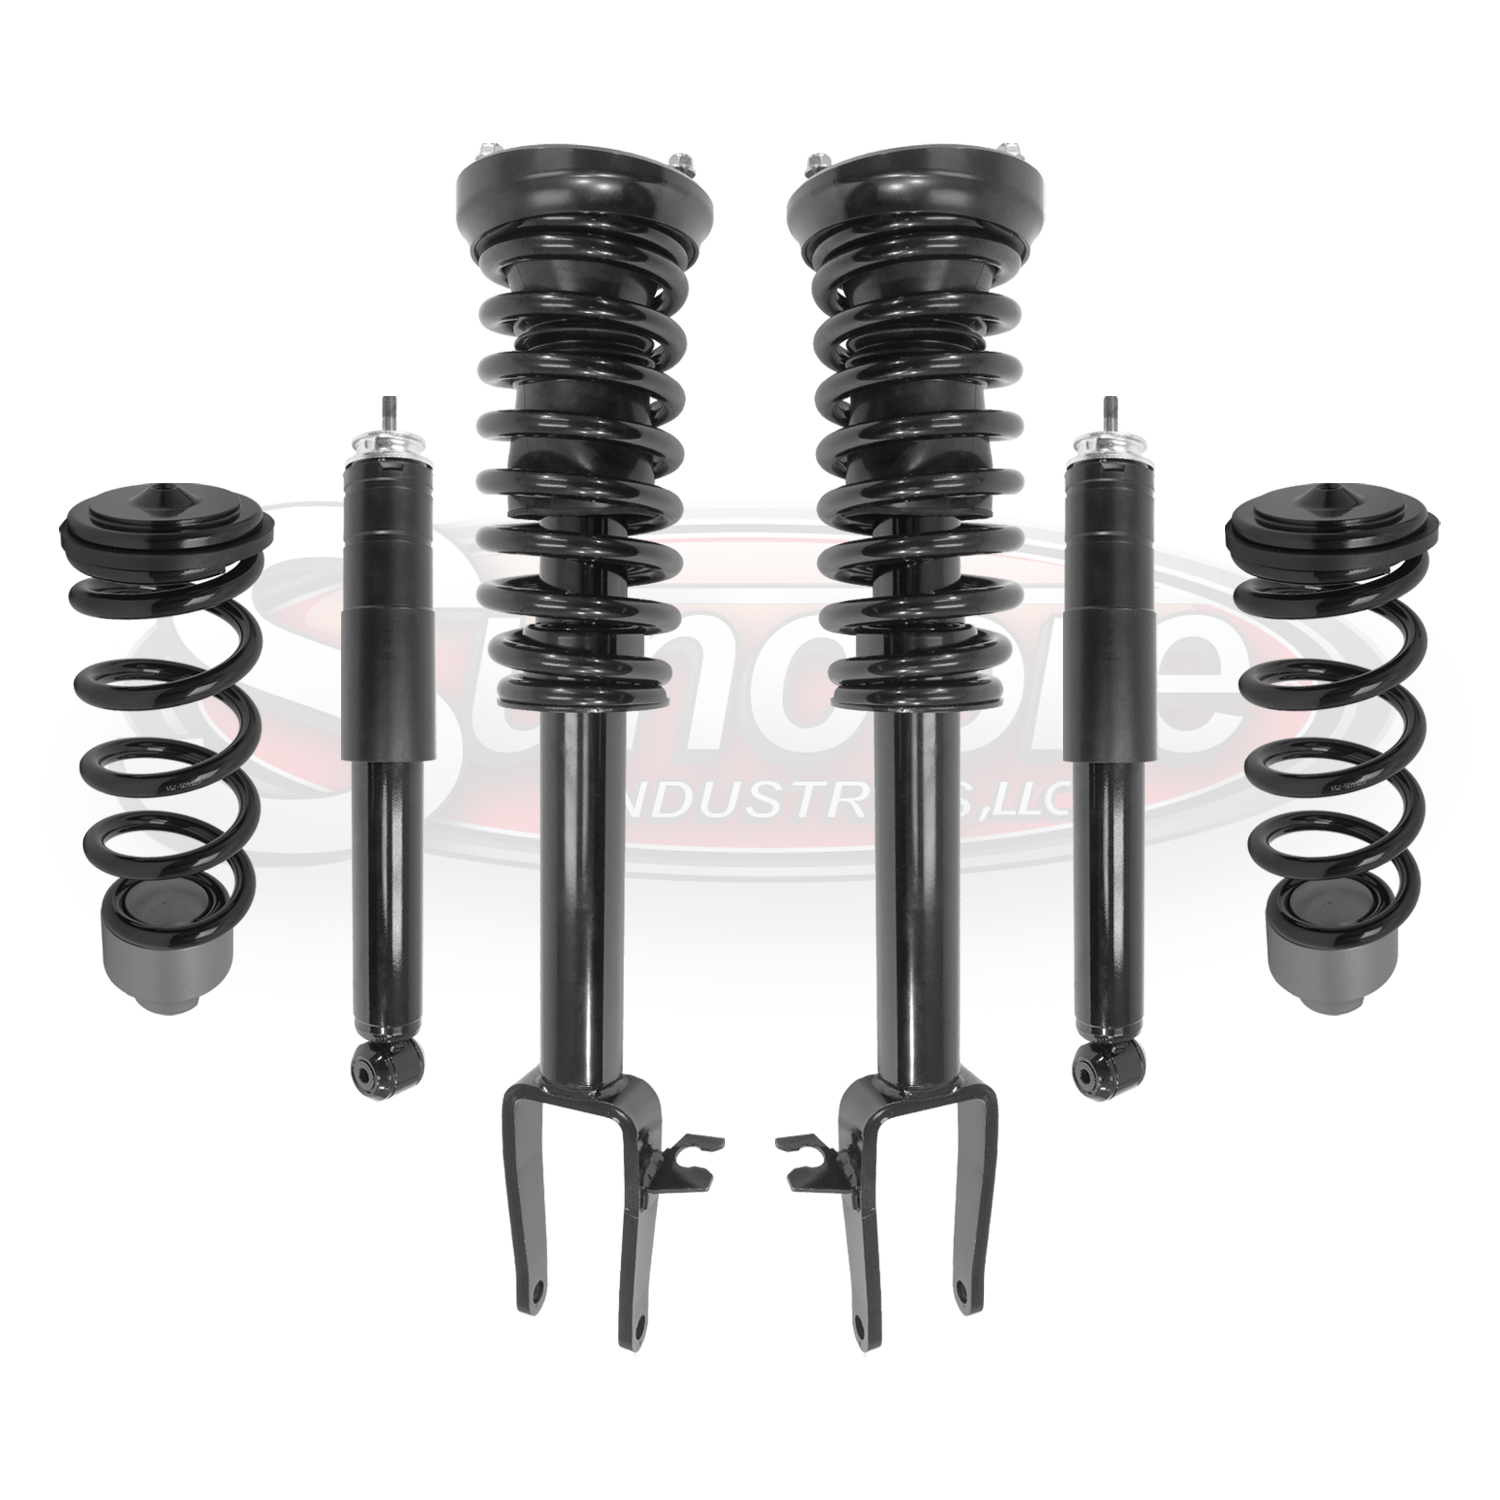 Air To Coil Spring Suspension Conversion Kit For 2003-2009 Mercedes E-Class W211 Airmatic 4Matic Wagon